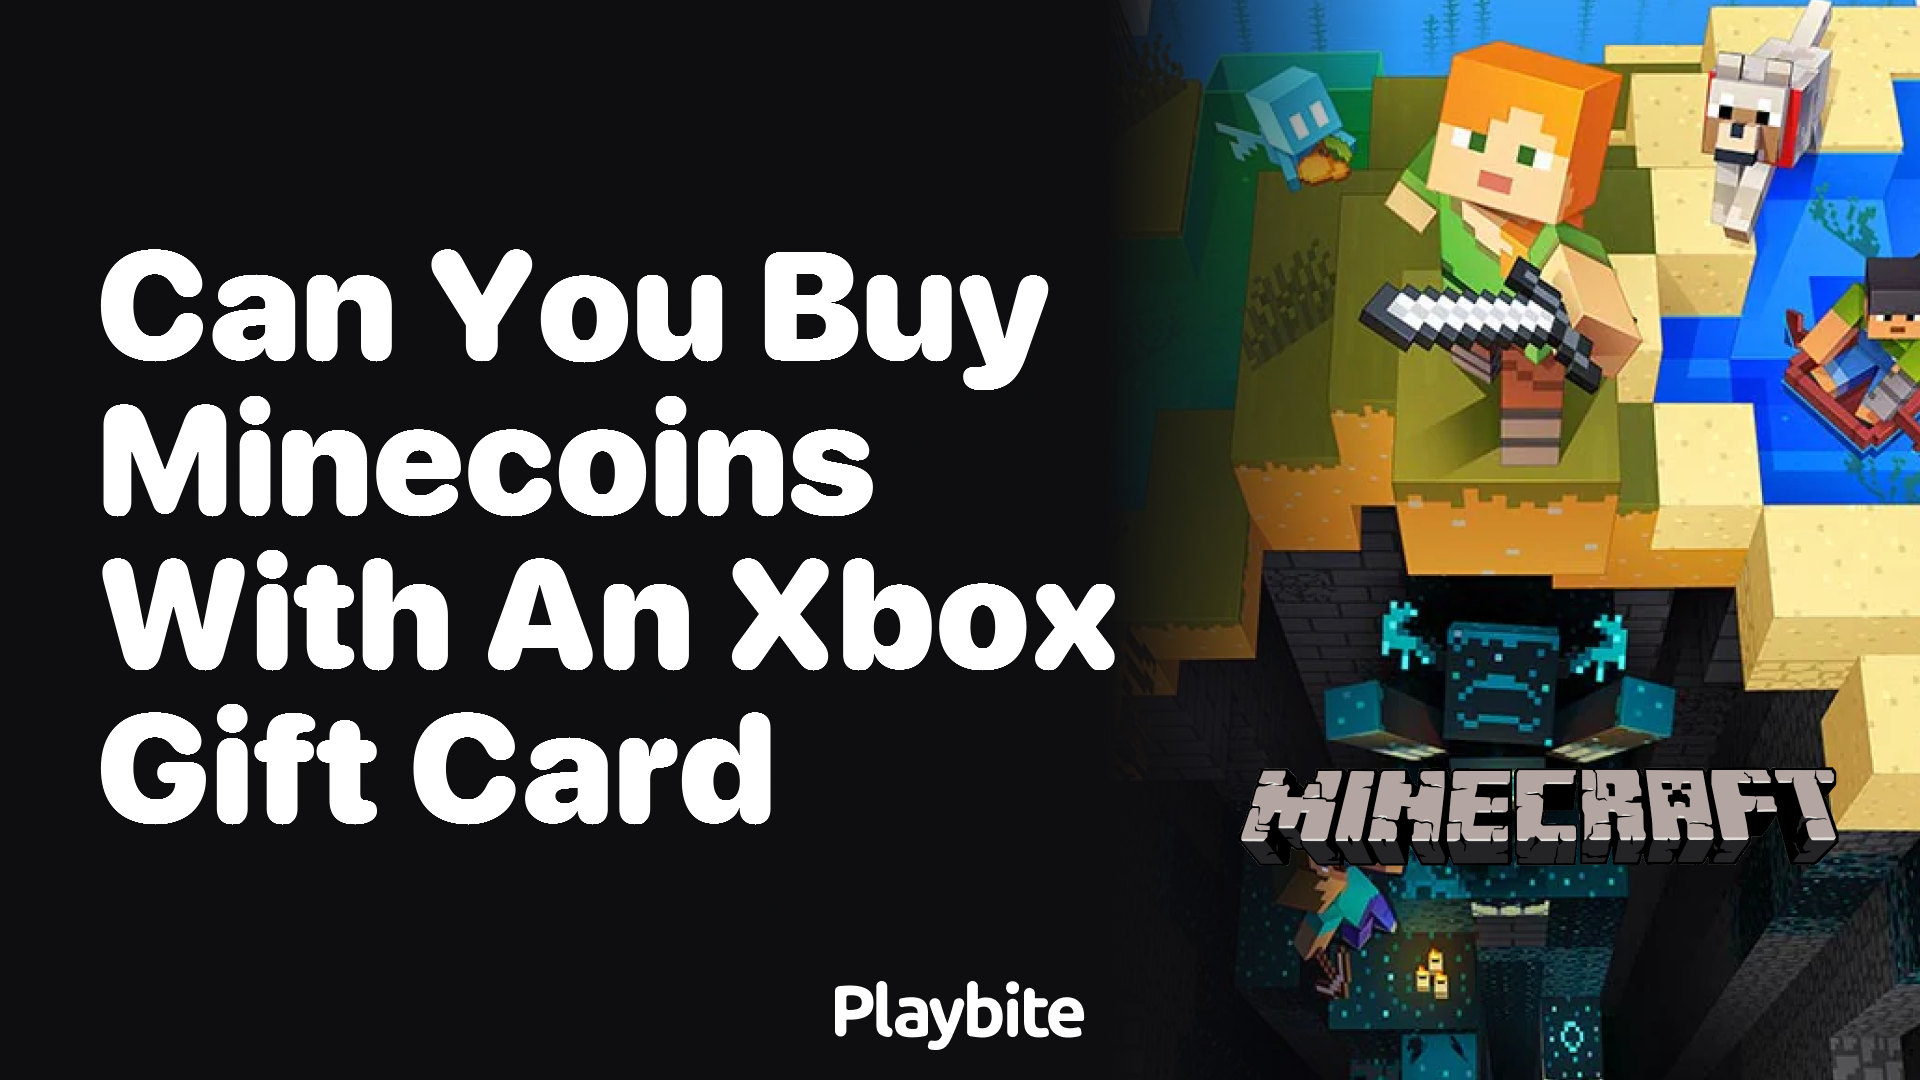 Can You Buy Minecoins with an Xbox Gift Card?